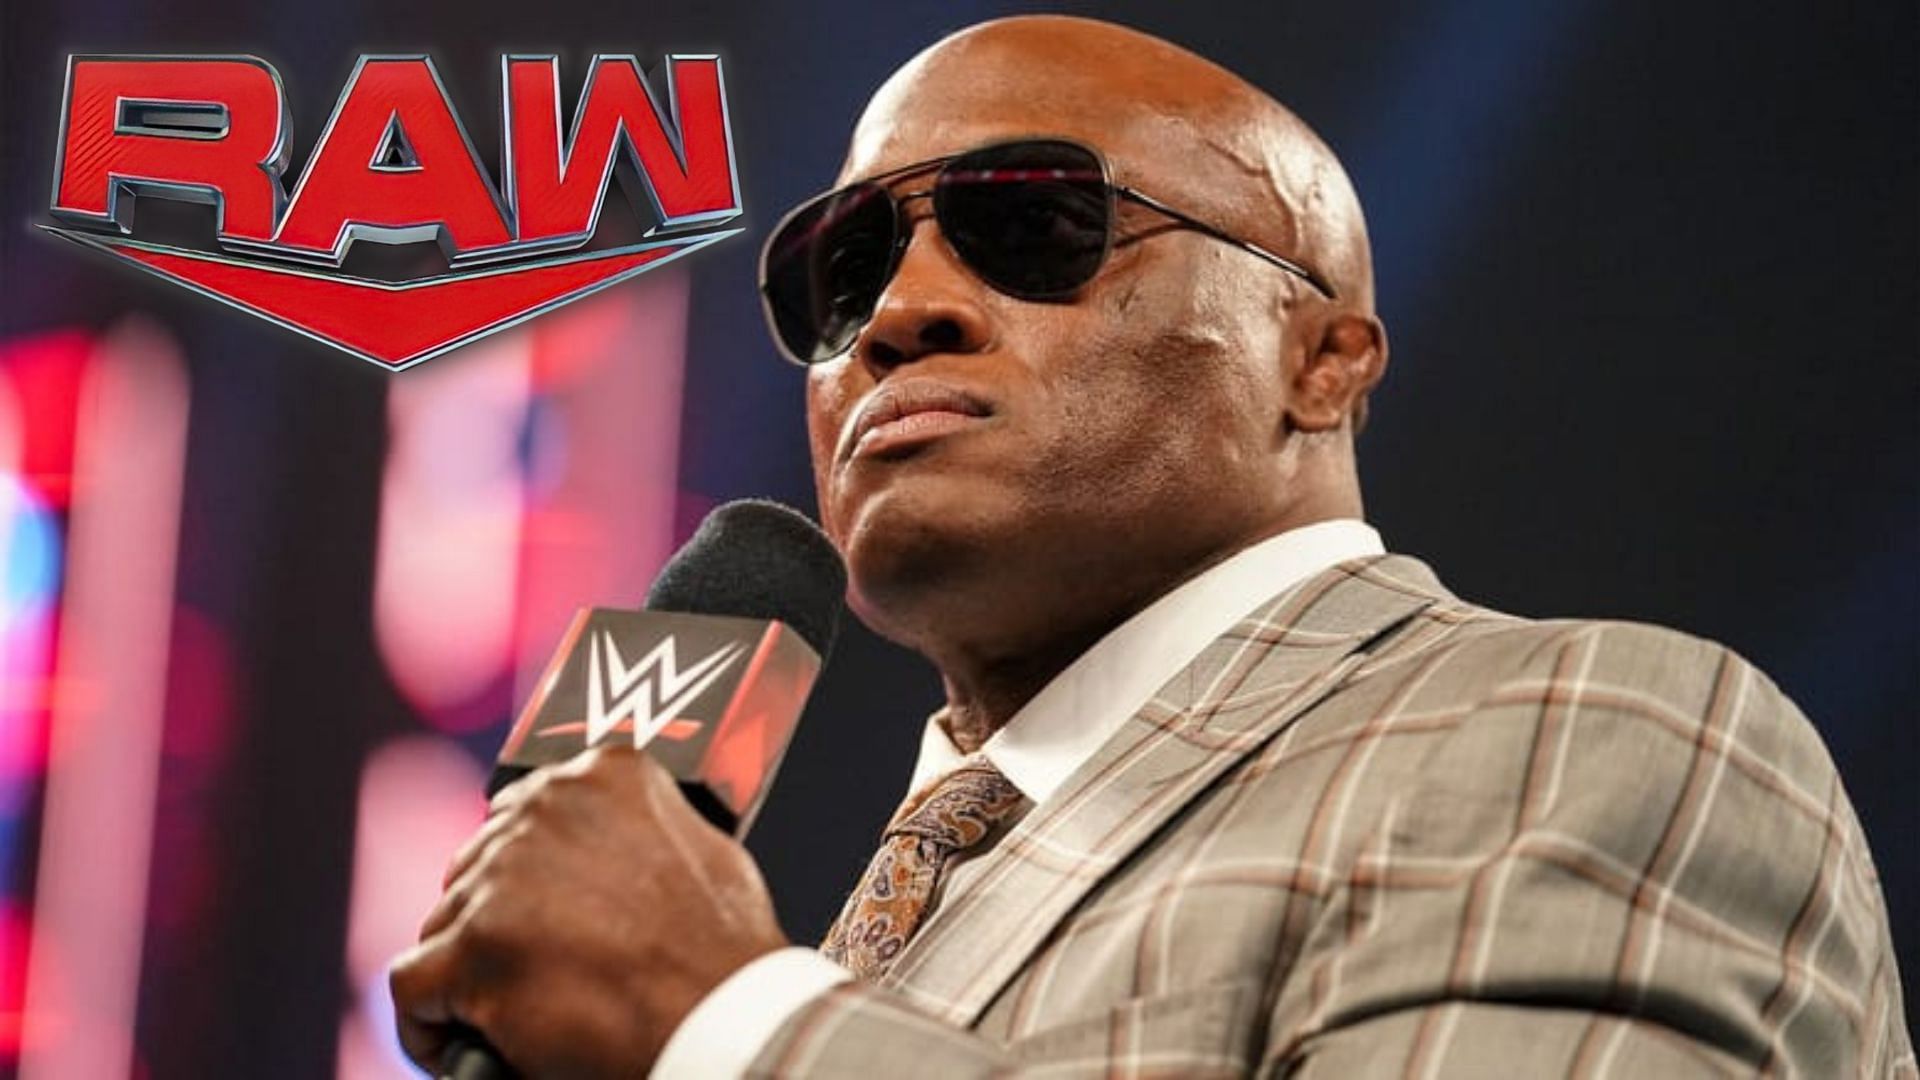 Bobby Lashley is set to appear on RAW soon